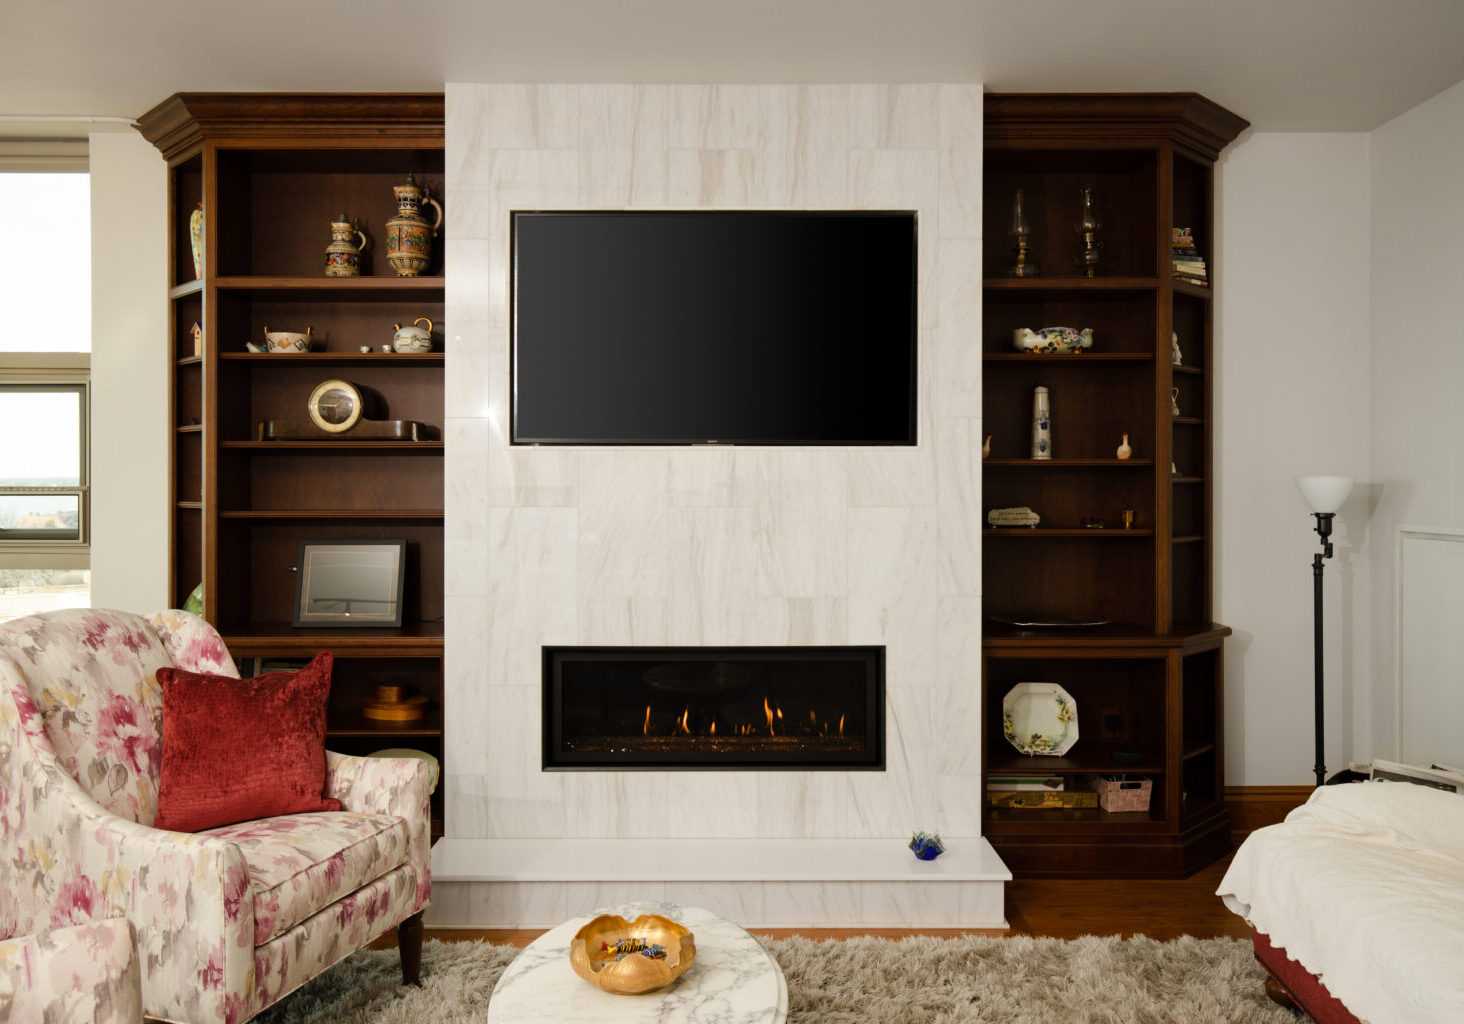 Elegant living room fireplace scene, consisting of a white tile mantle and custom dark wooden shelves on both sides, completed by R.E. McNamara Inc.